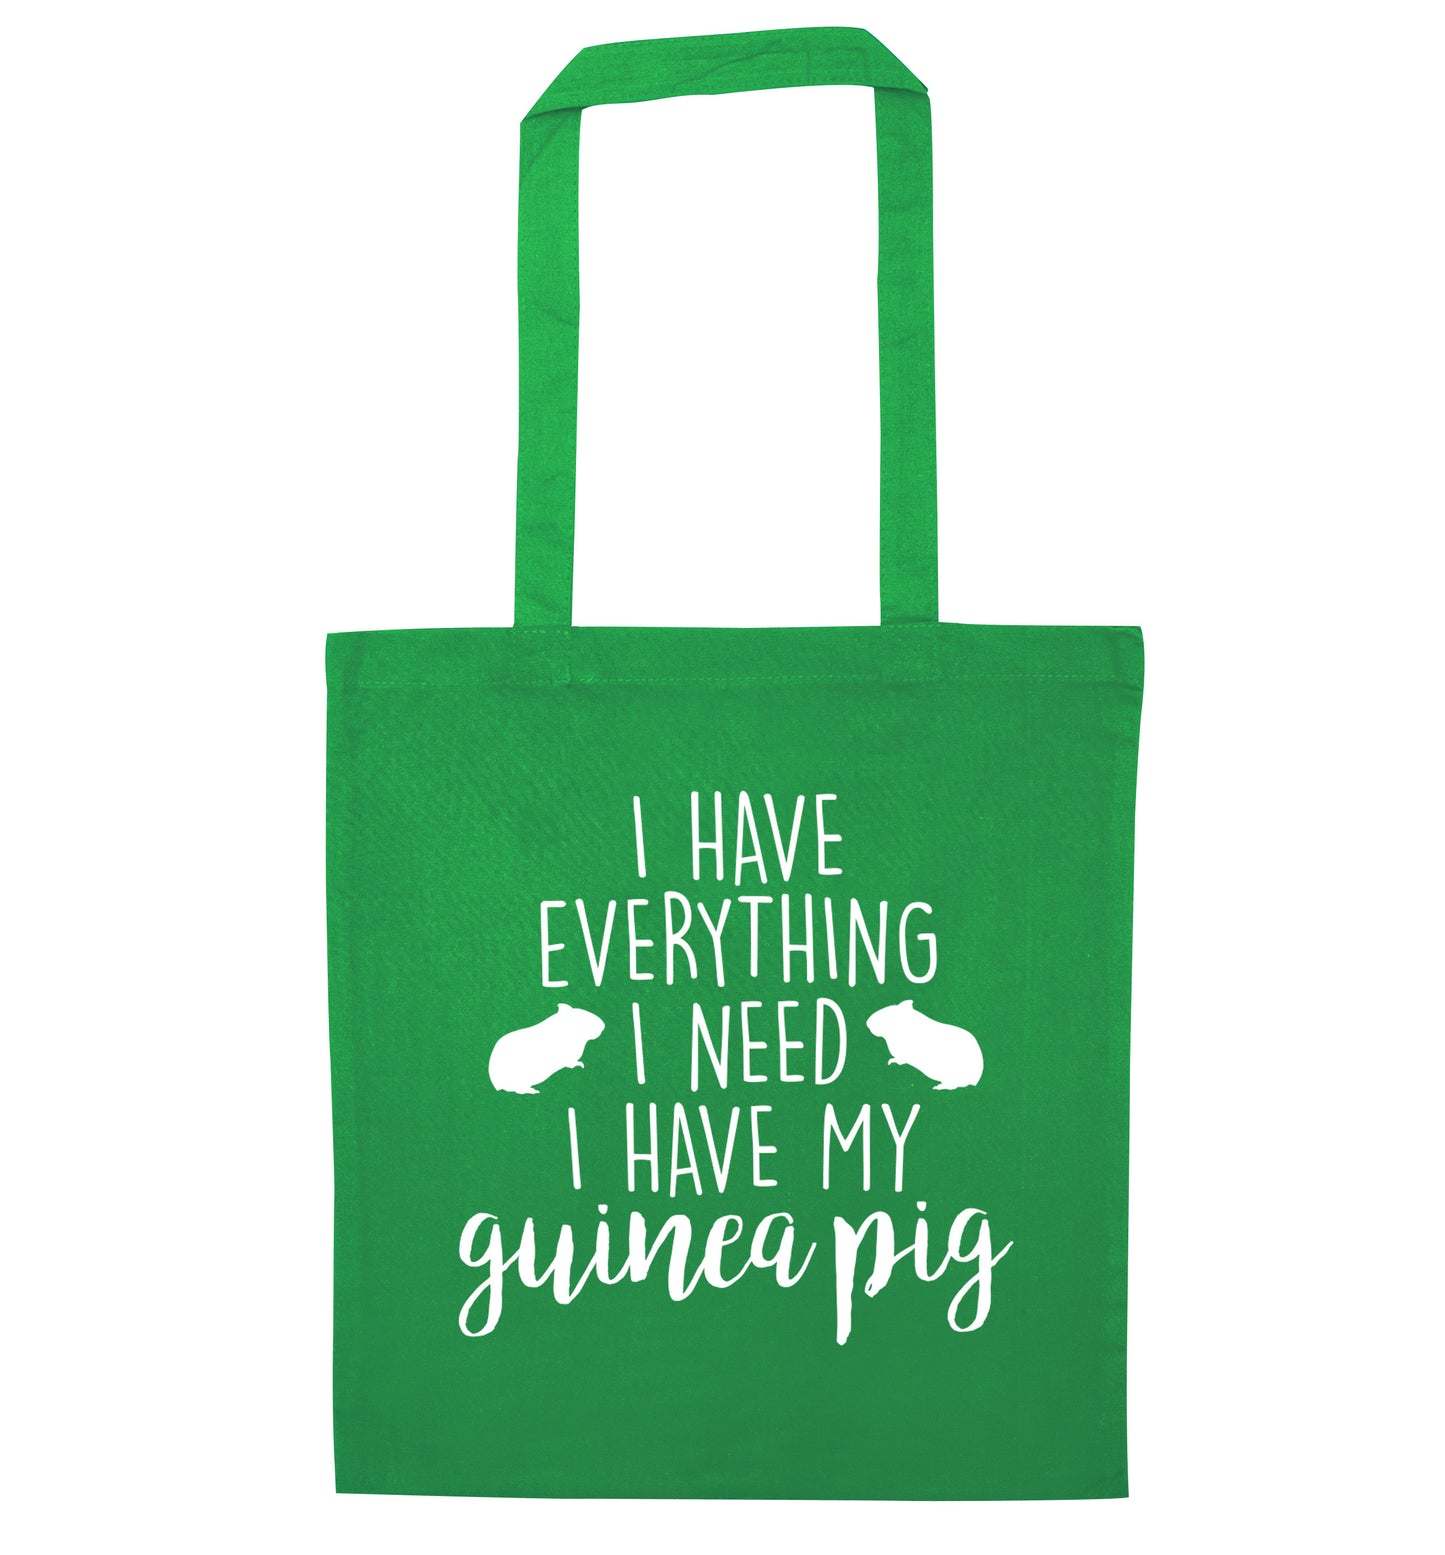 I have everything I need, I have my guinea pig green tote bag